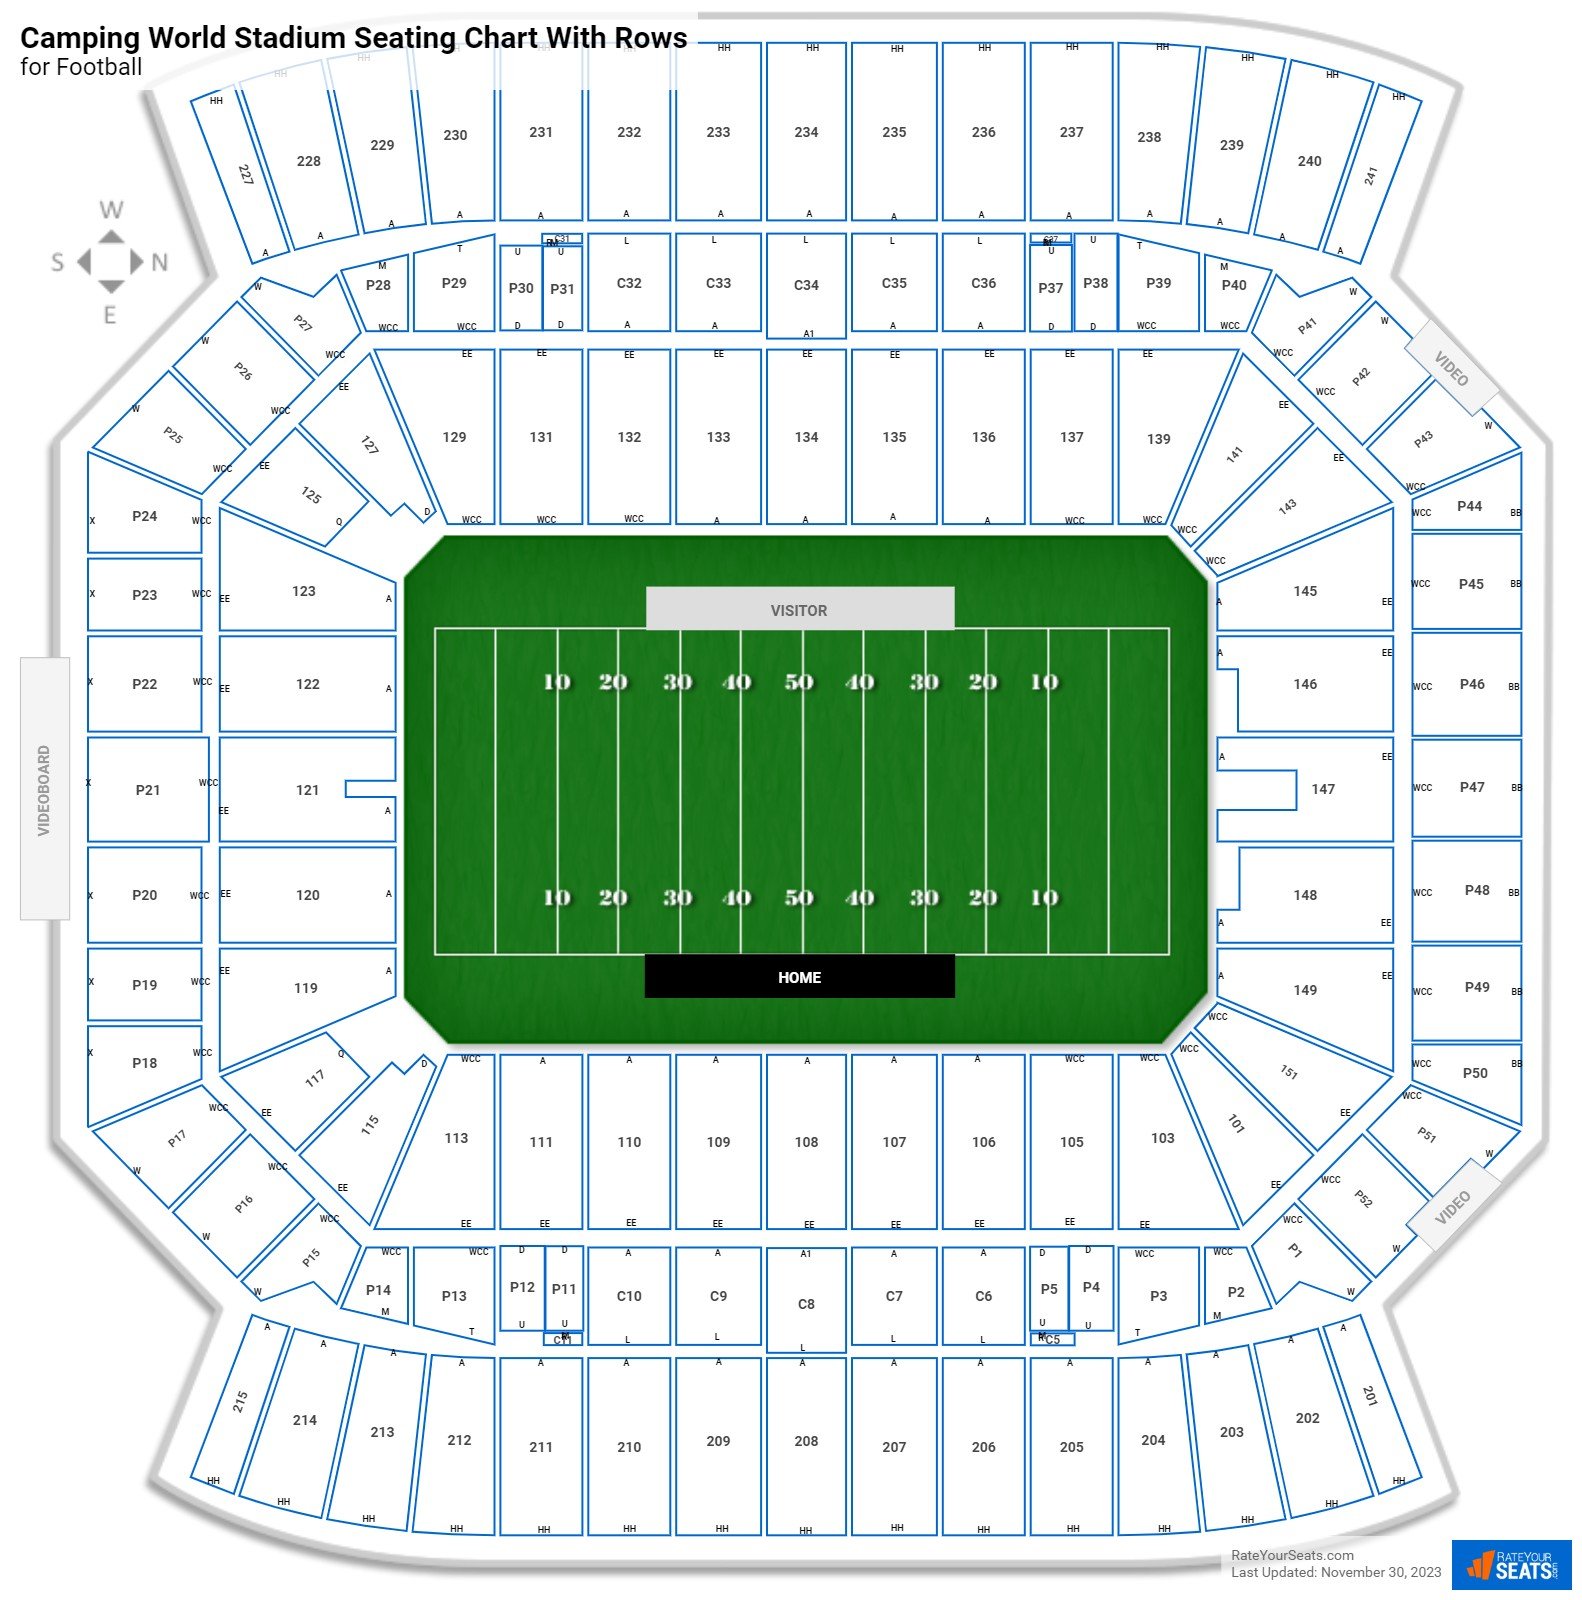 Camping World Stadium seating chart with row numbers